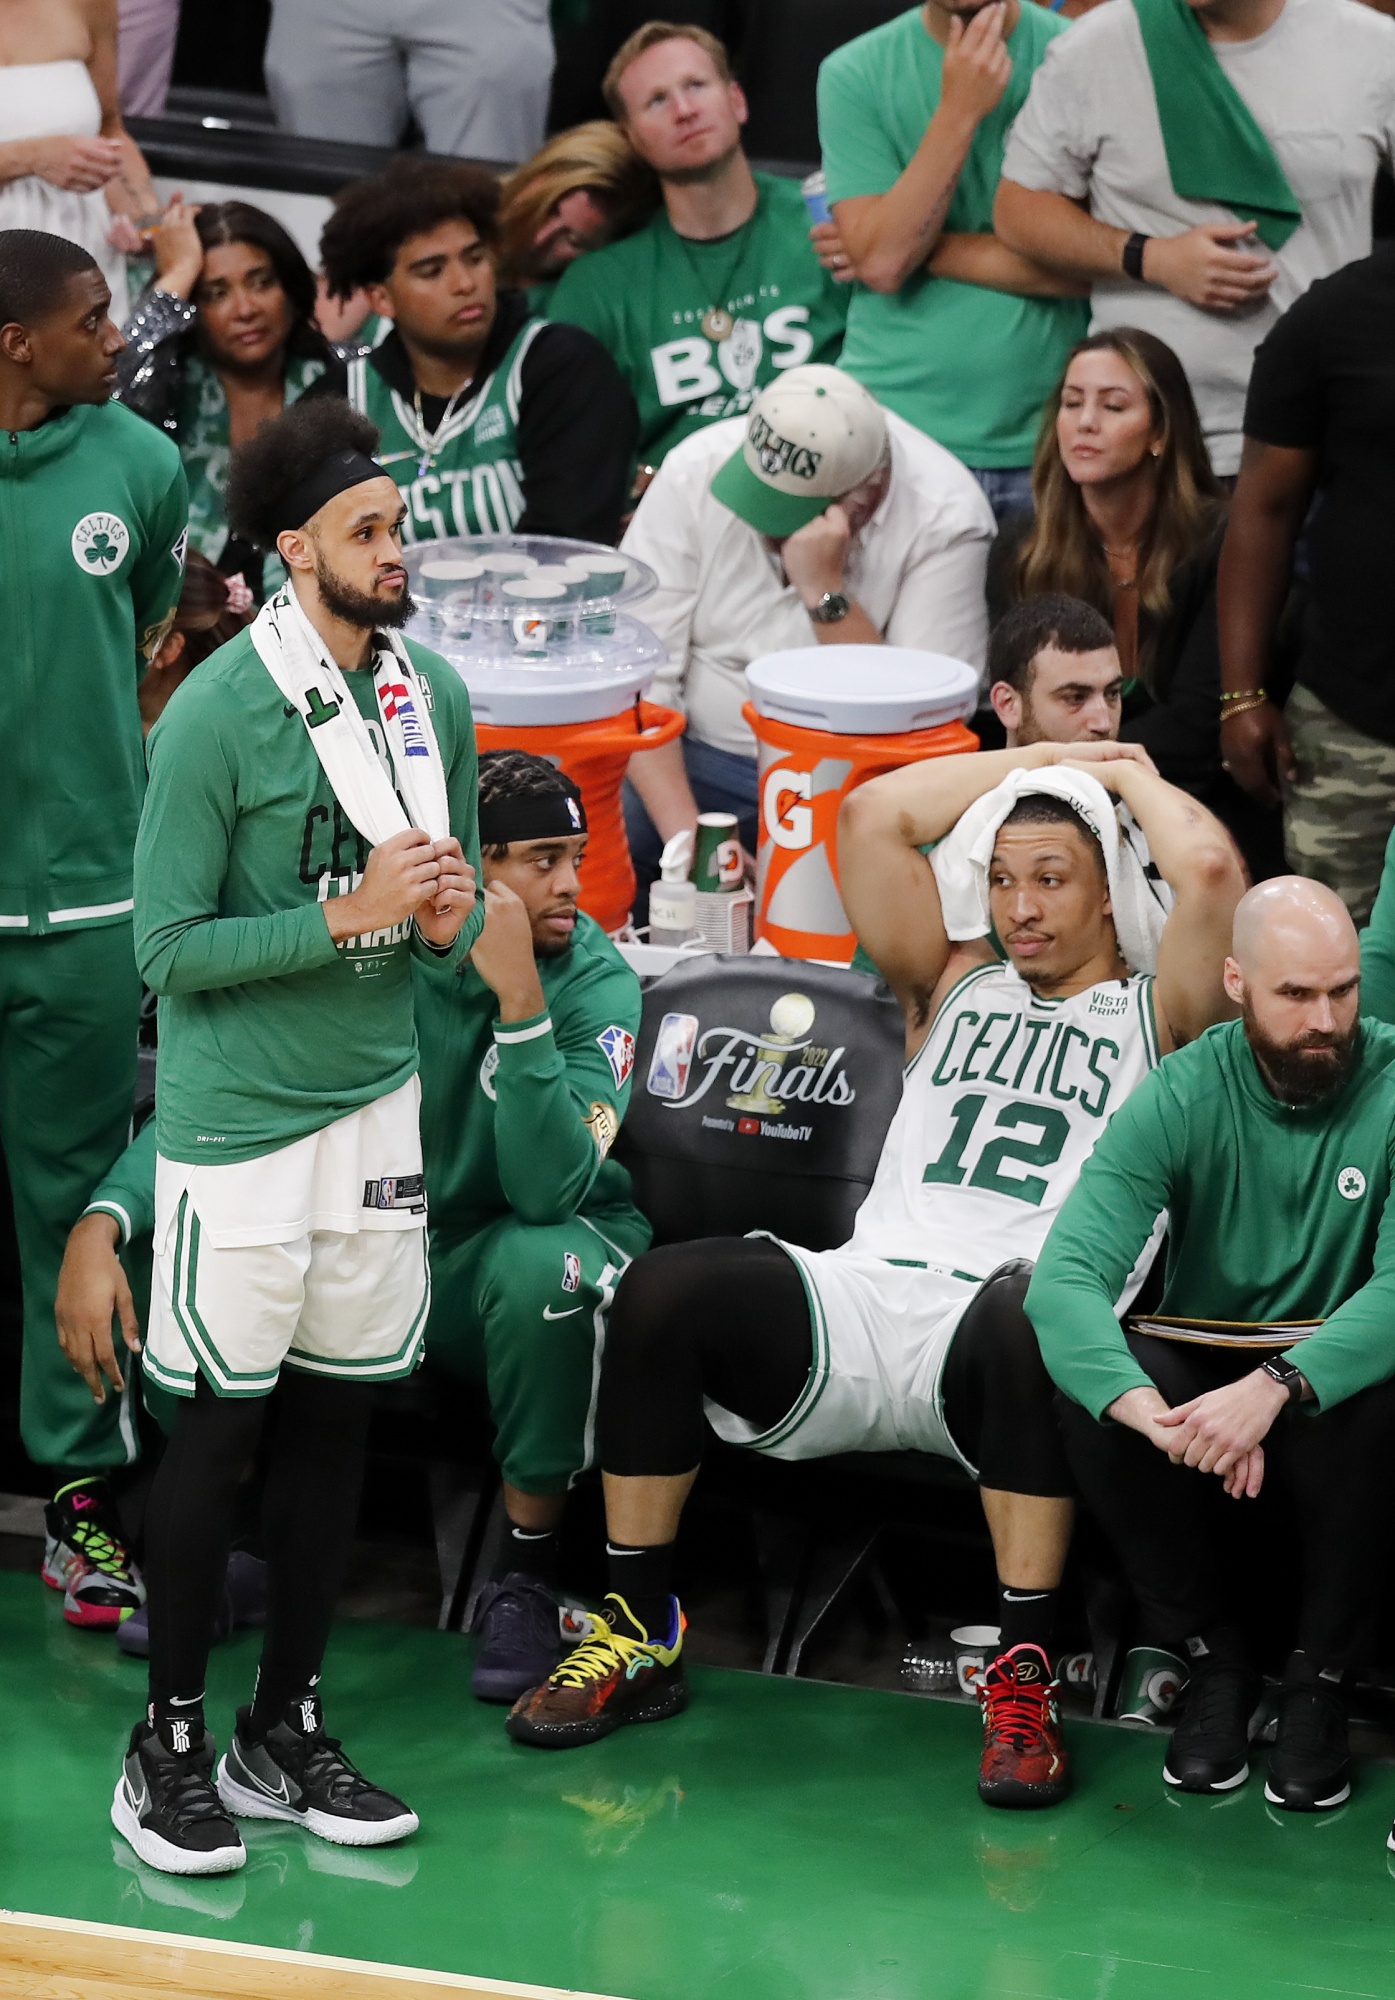 Celtics lose Game 6 and fall to the Warriors in the NBA Finals